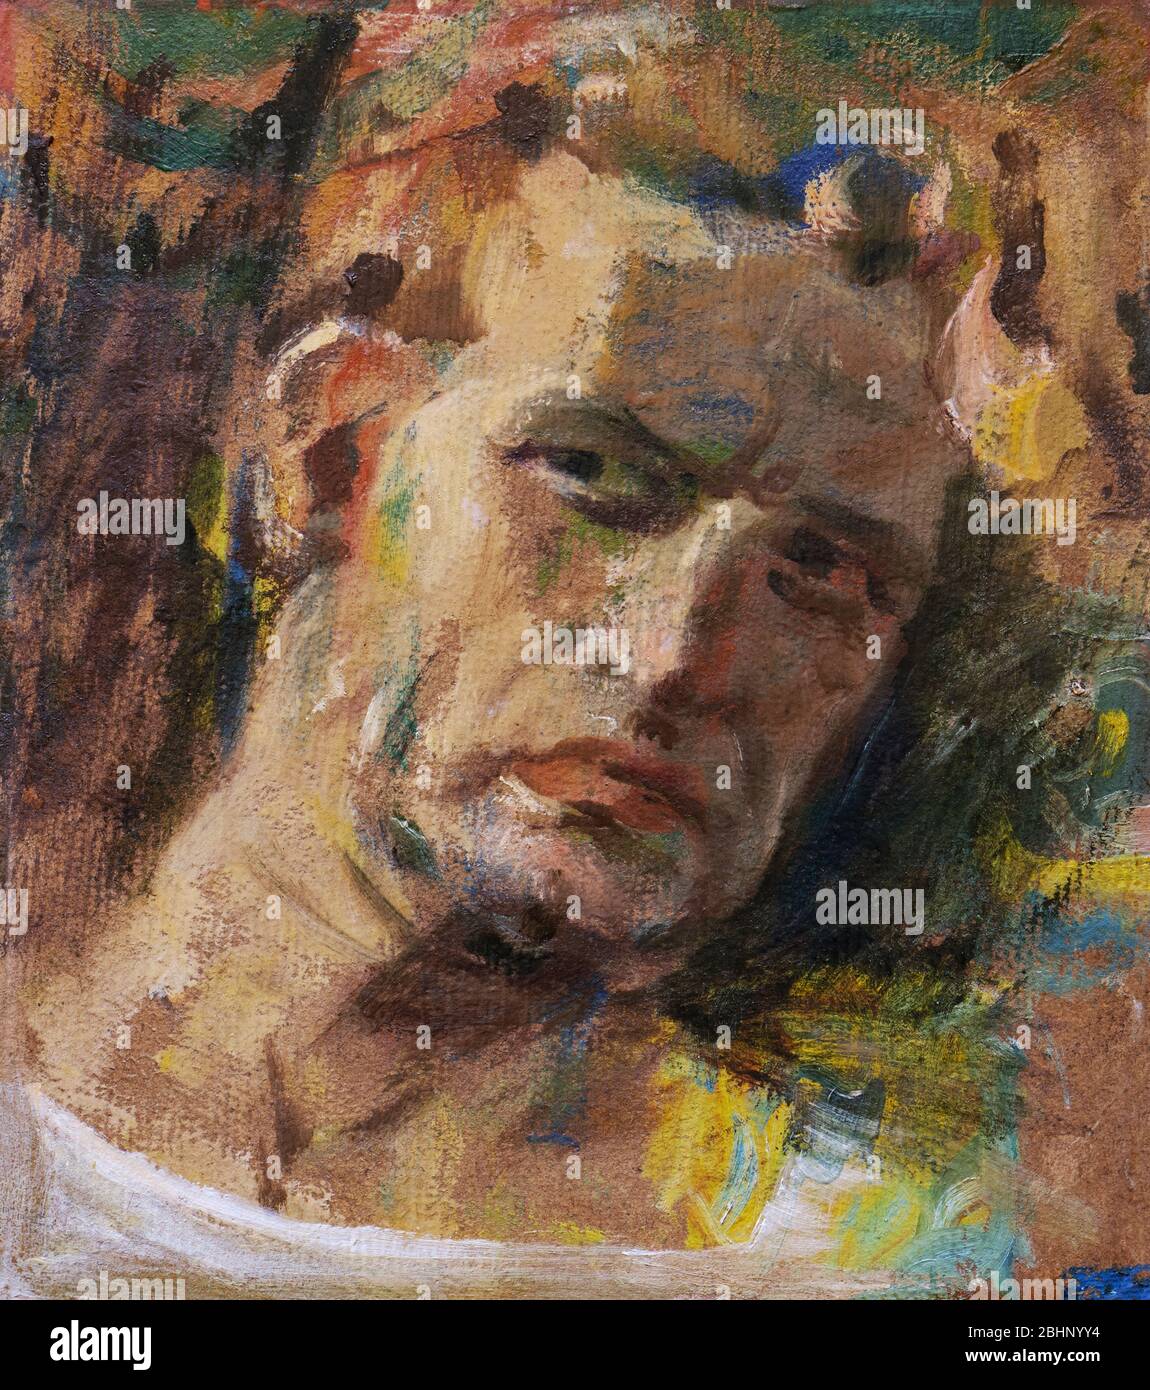 Expressive man portrait oil painting sketch on textured canvas Stock Photo